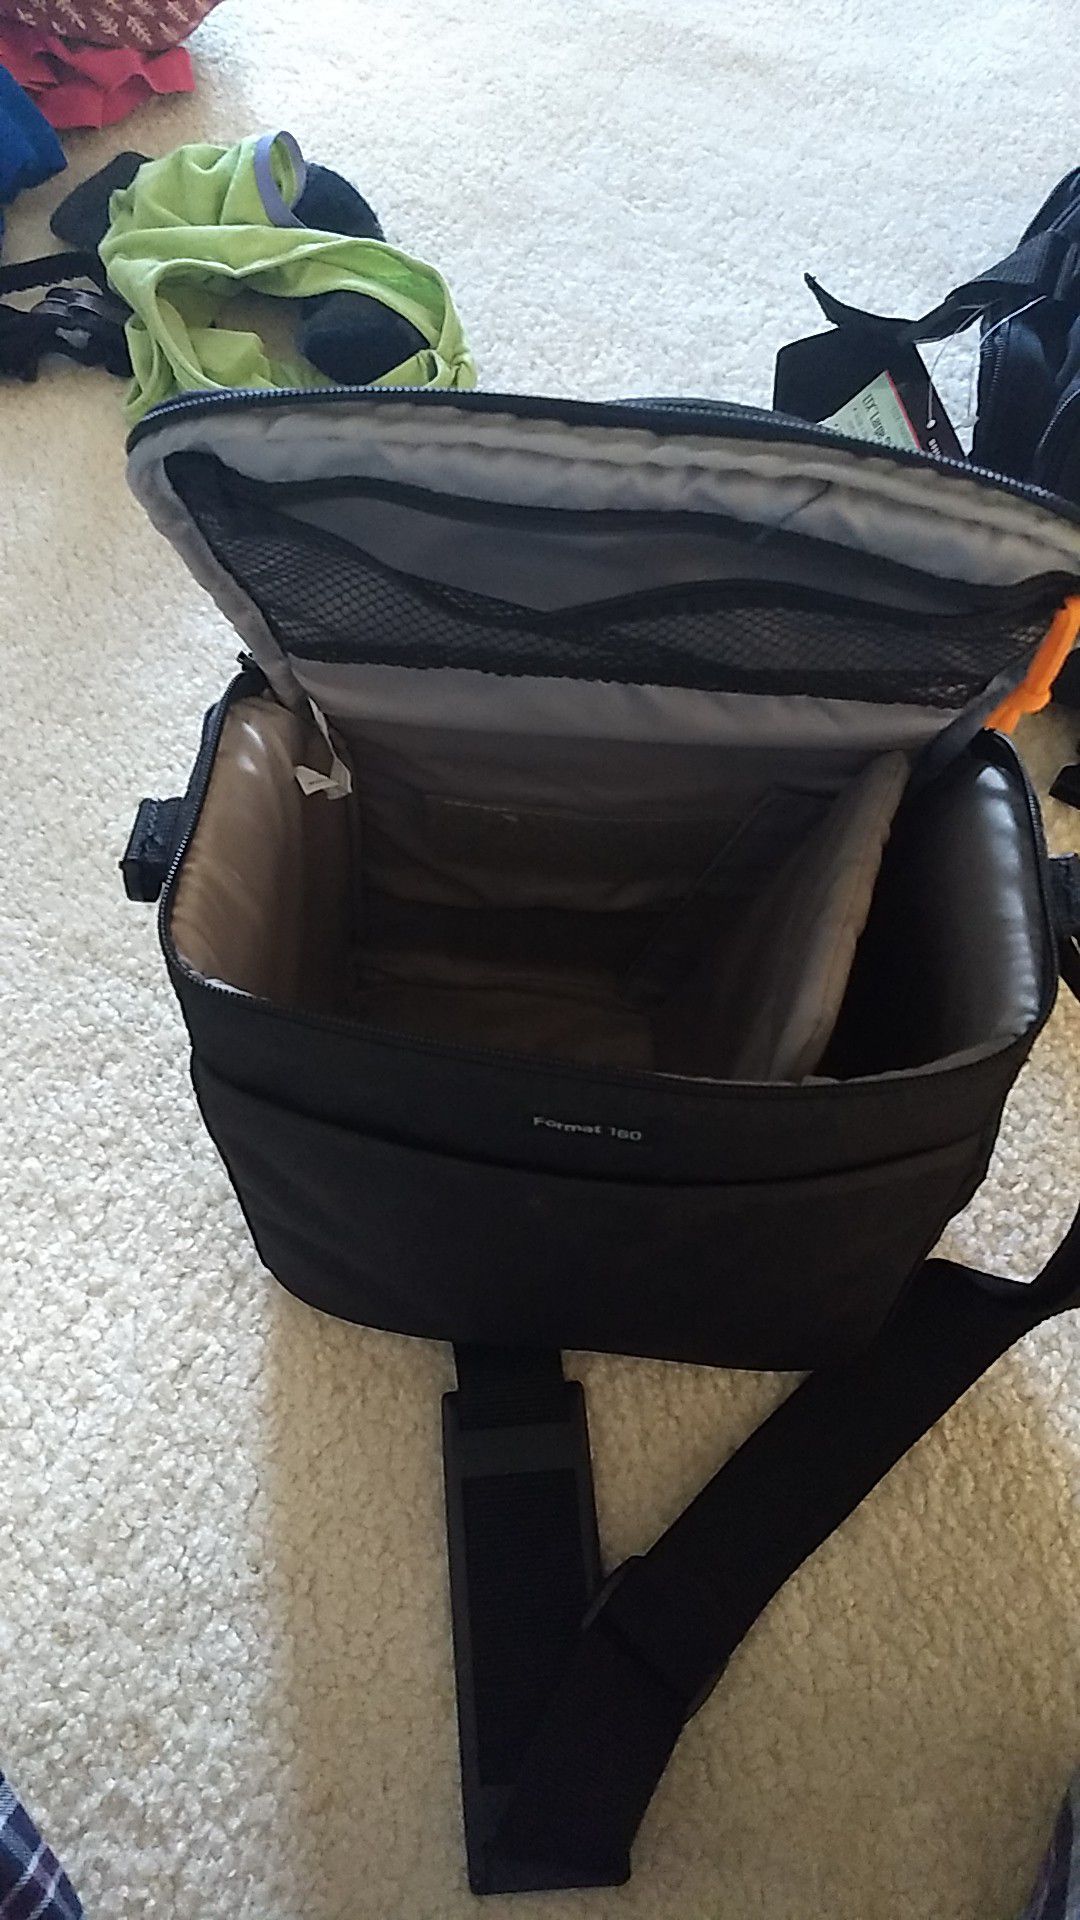 Lowepro camera bag (model: Format 160). Not very large, but call hold an SLR & 1 lens.